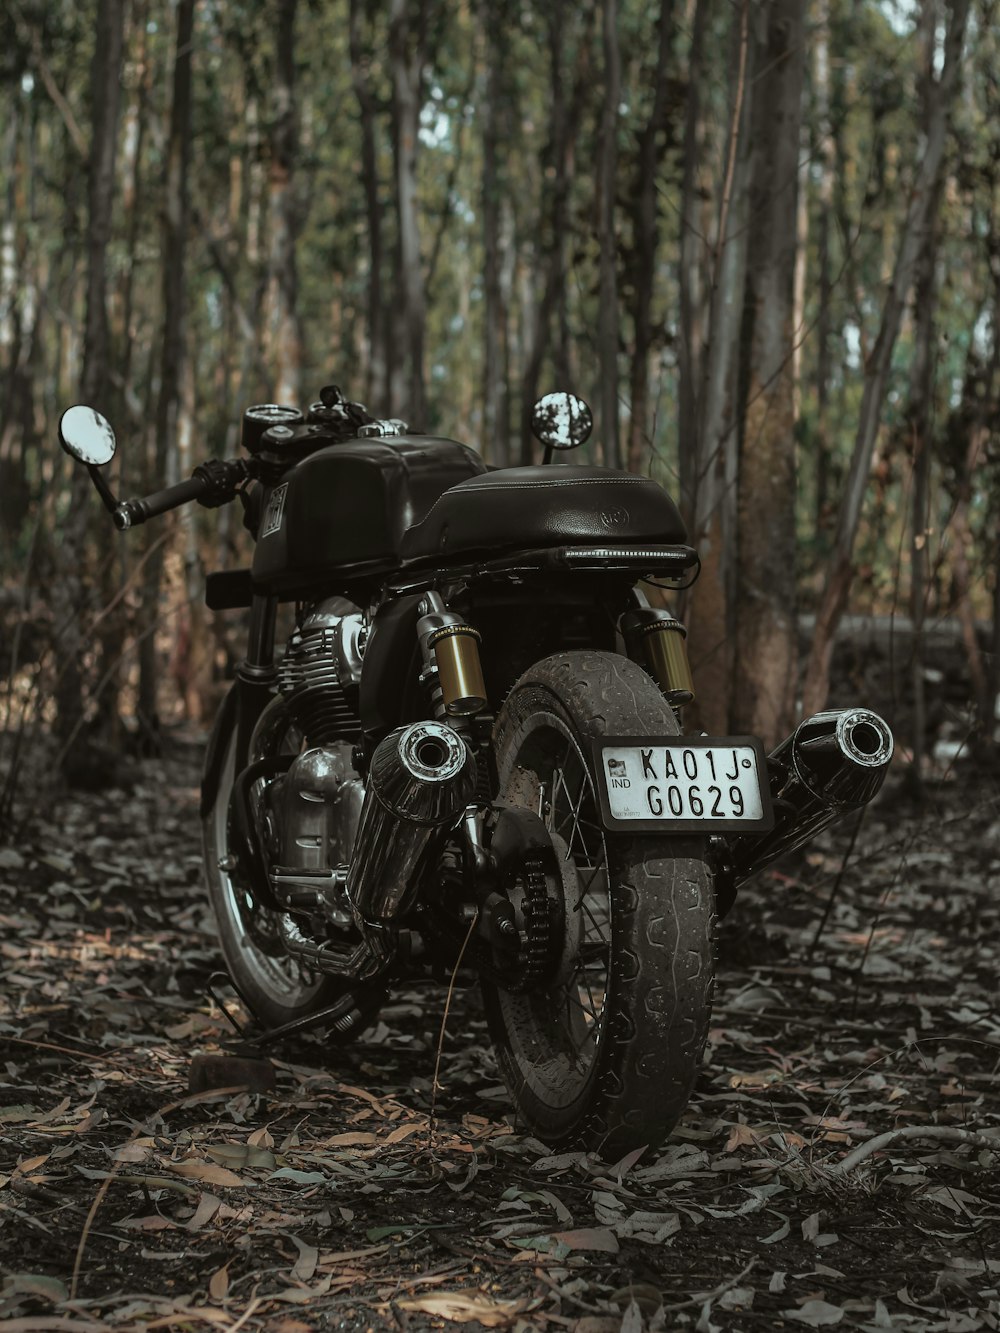 black and gray motorcycle on brown dried leaves